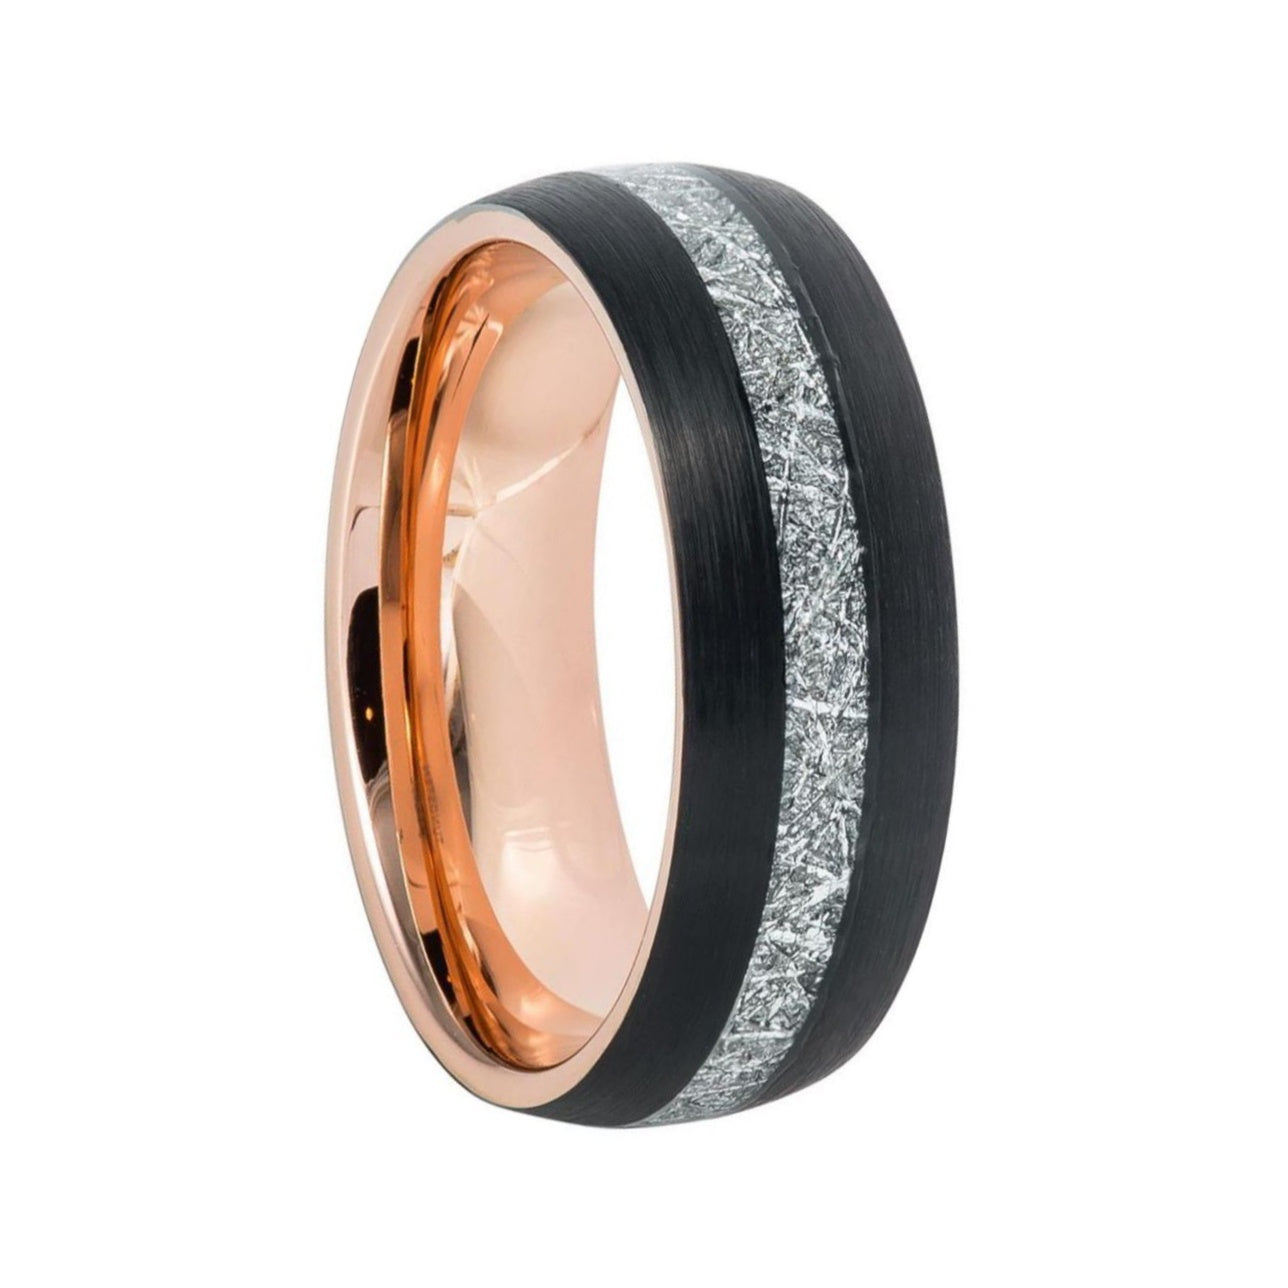 Black Tungsten Men's Wedding Band with Imitation Meteorite Inlay and Rose Gold Interior